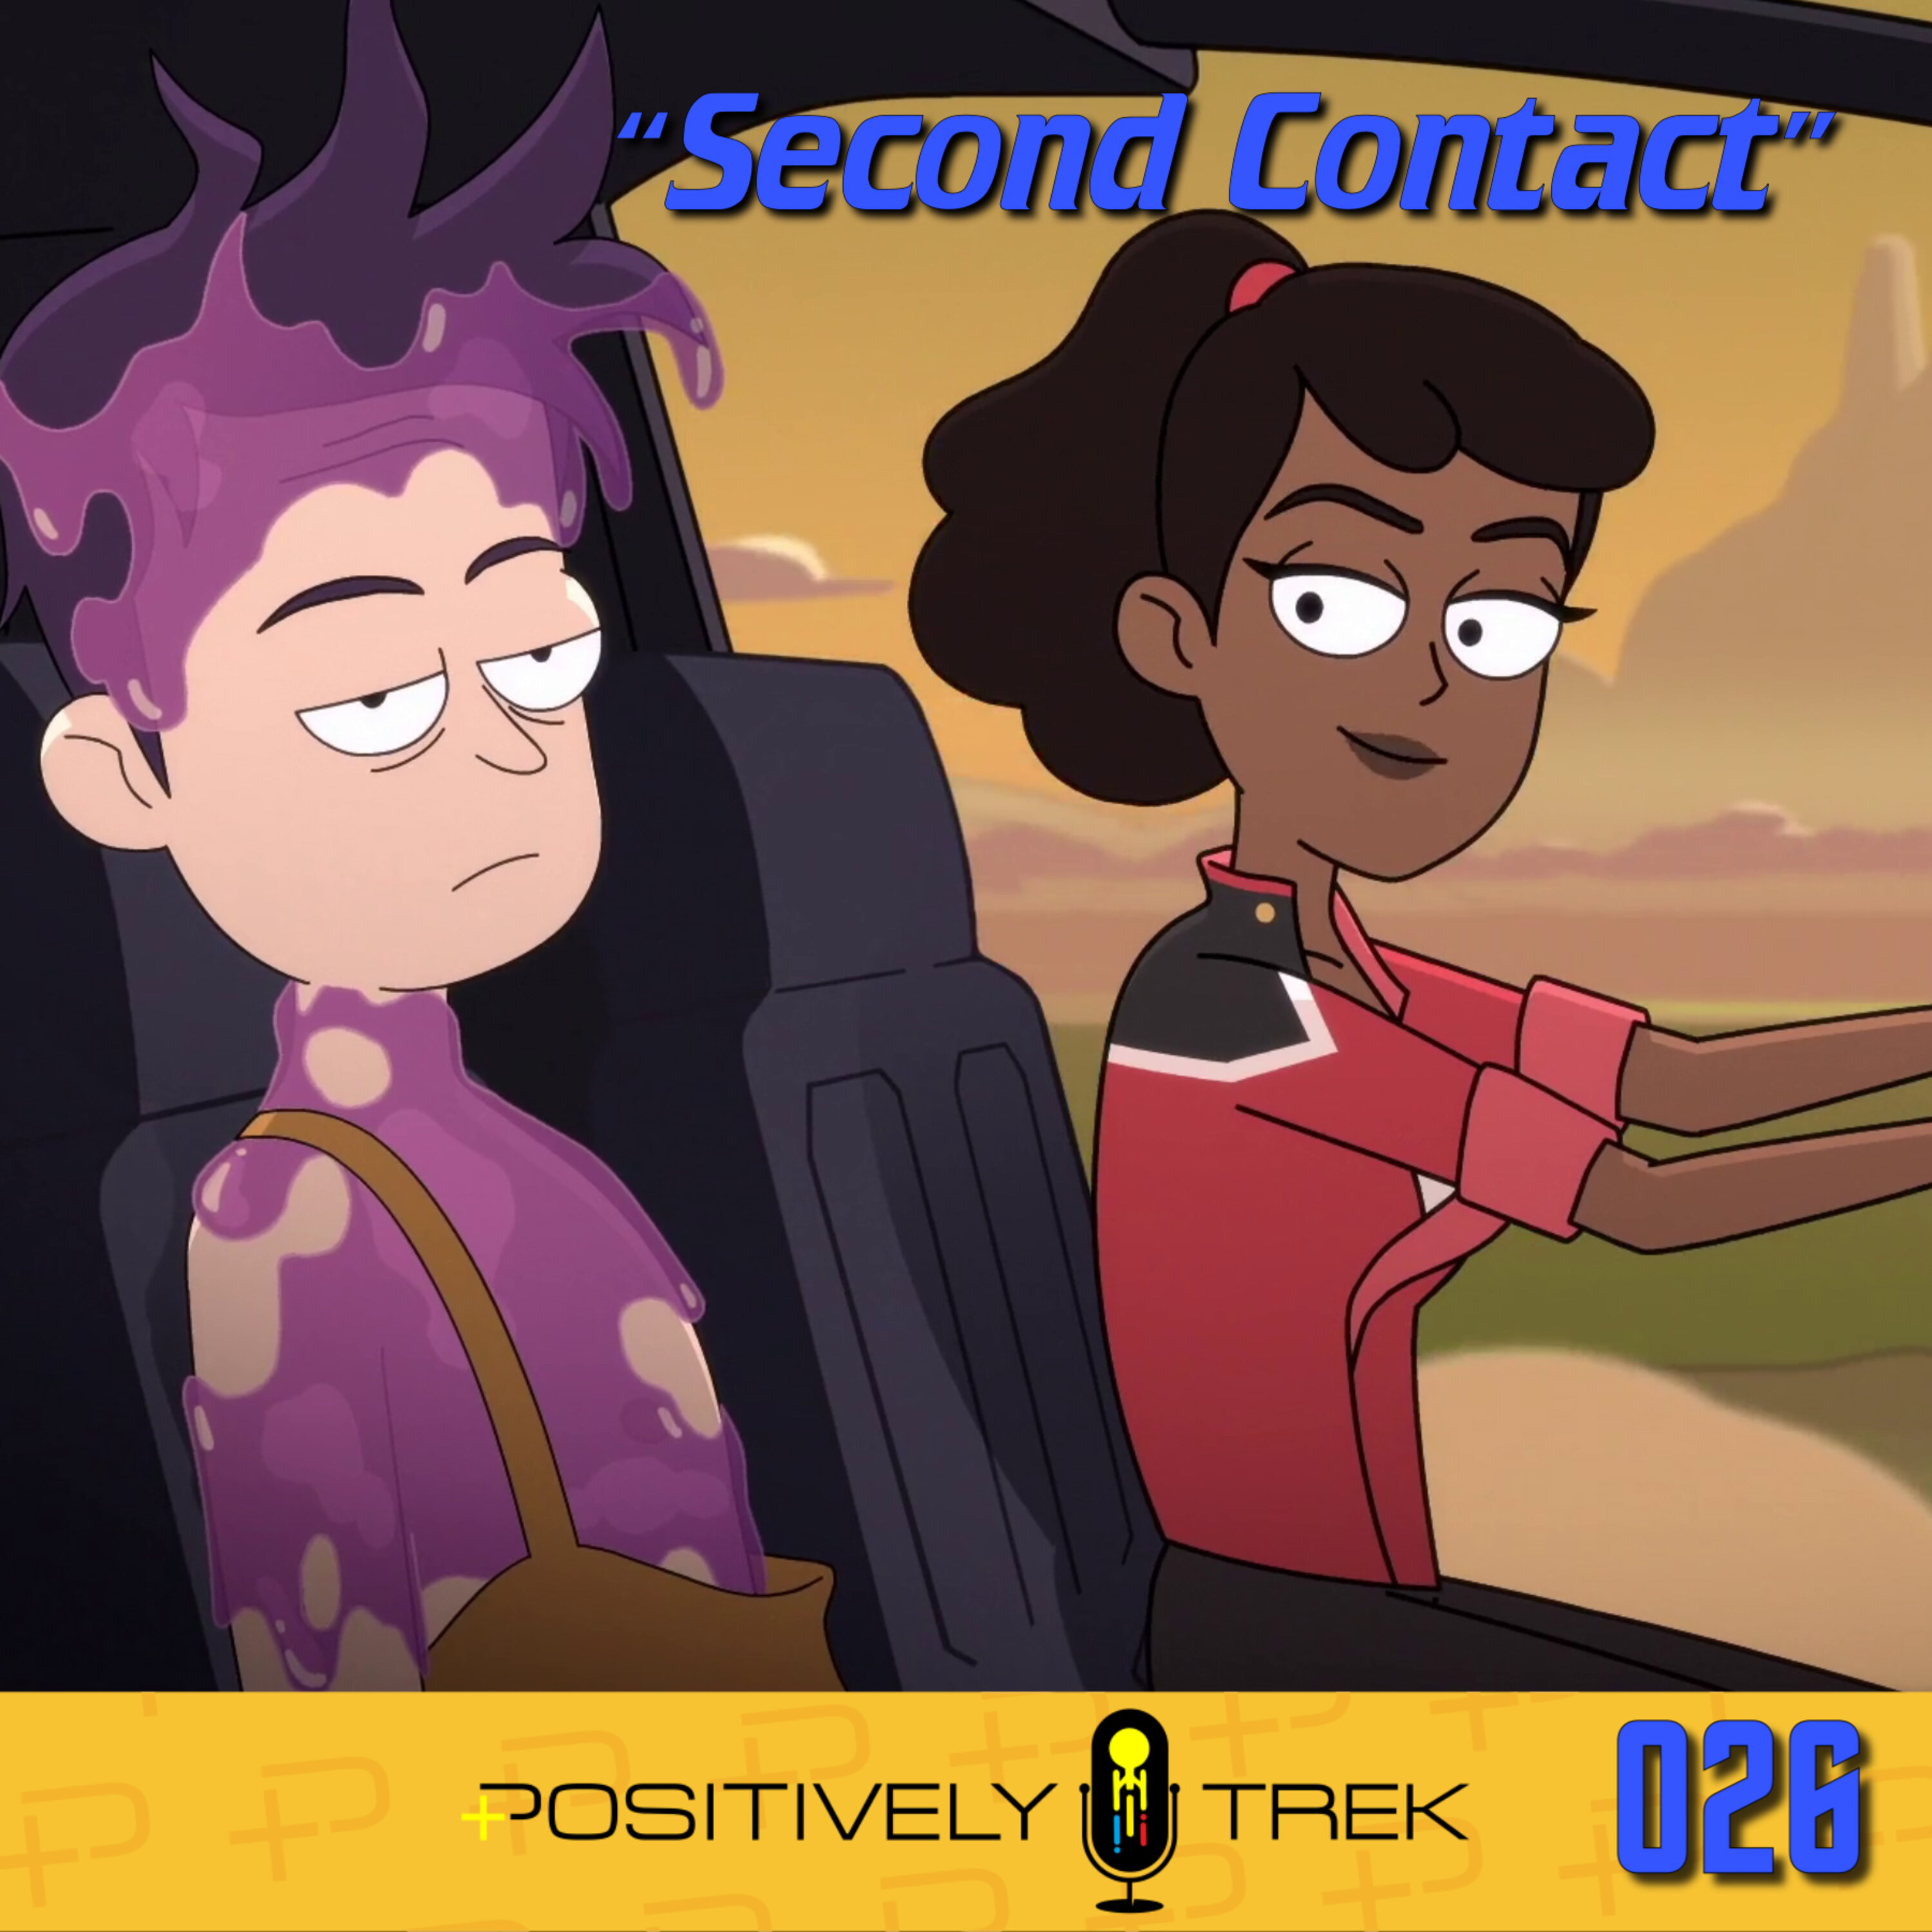 Lower Decks Review: "Second Contact" (1.01) Image